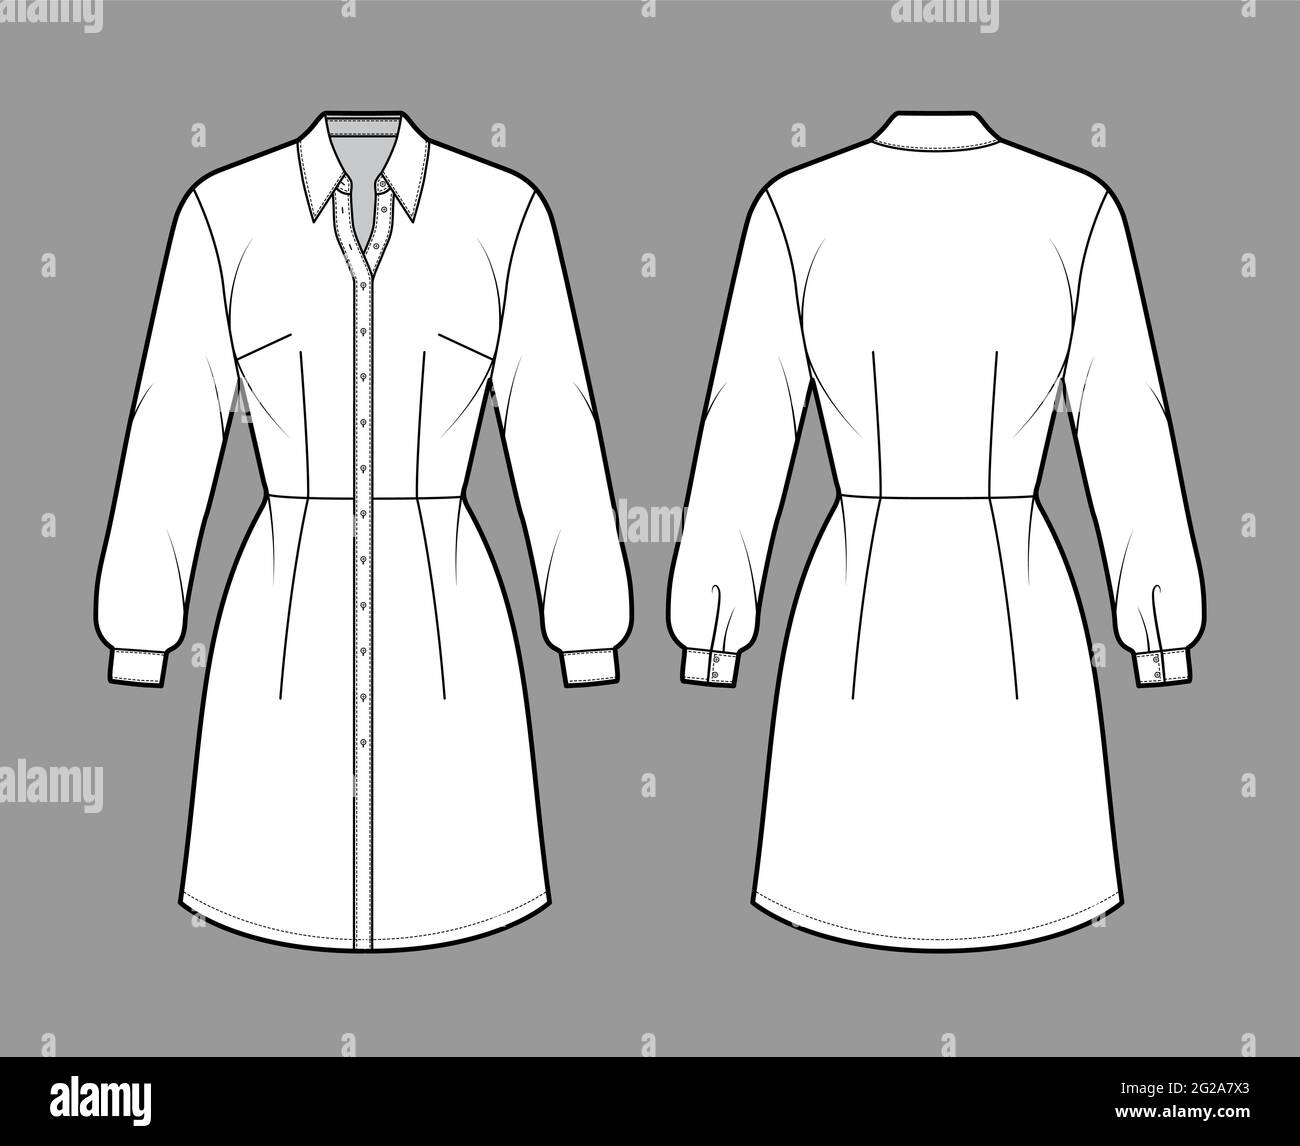 Dress shirt technical fashion illustration with long sleeves, fitted body, knee length skirt, classic collar, button closure. Flat apparel front, back, white color style. Women, men unisex CAD mockup Stock Vector